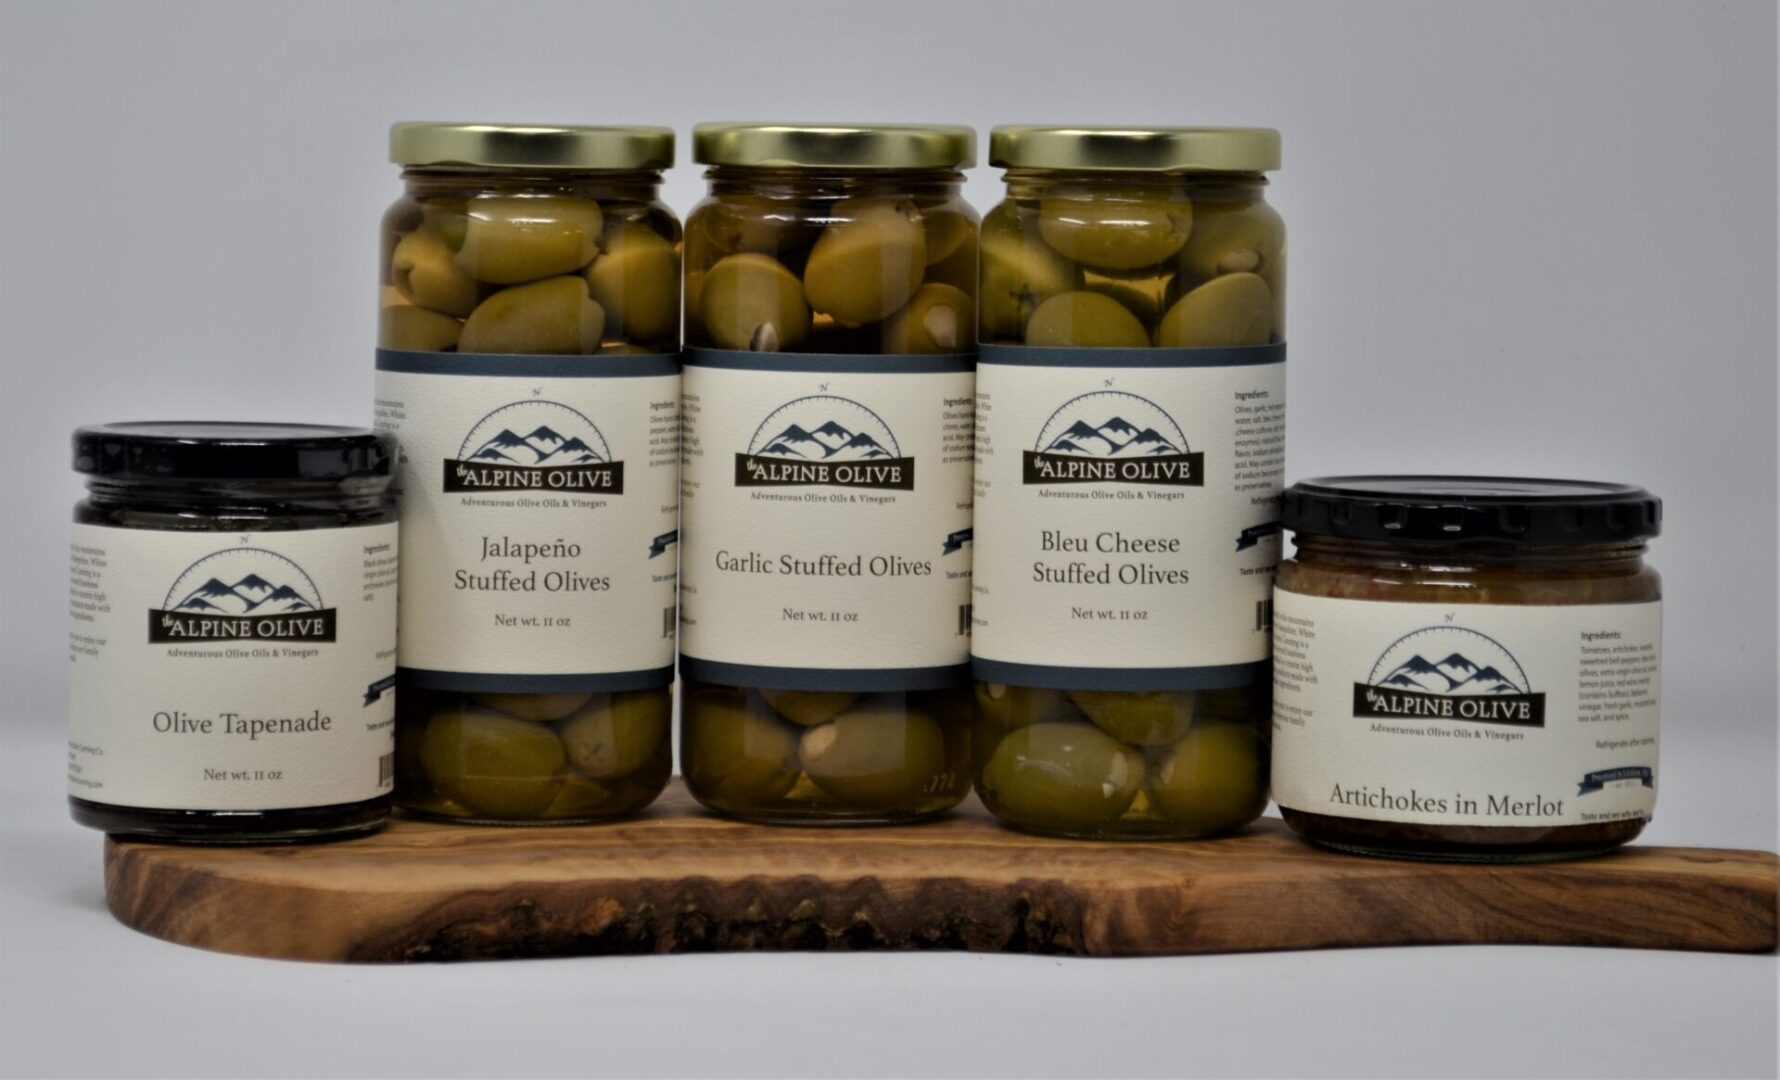 A wooden board holding jars of olives and other food.